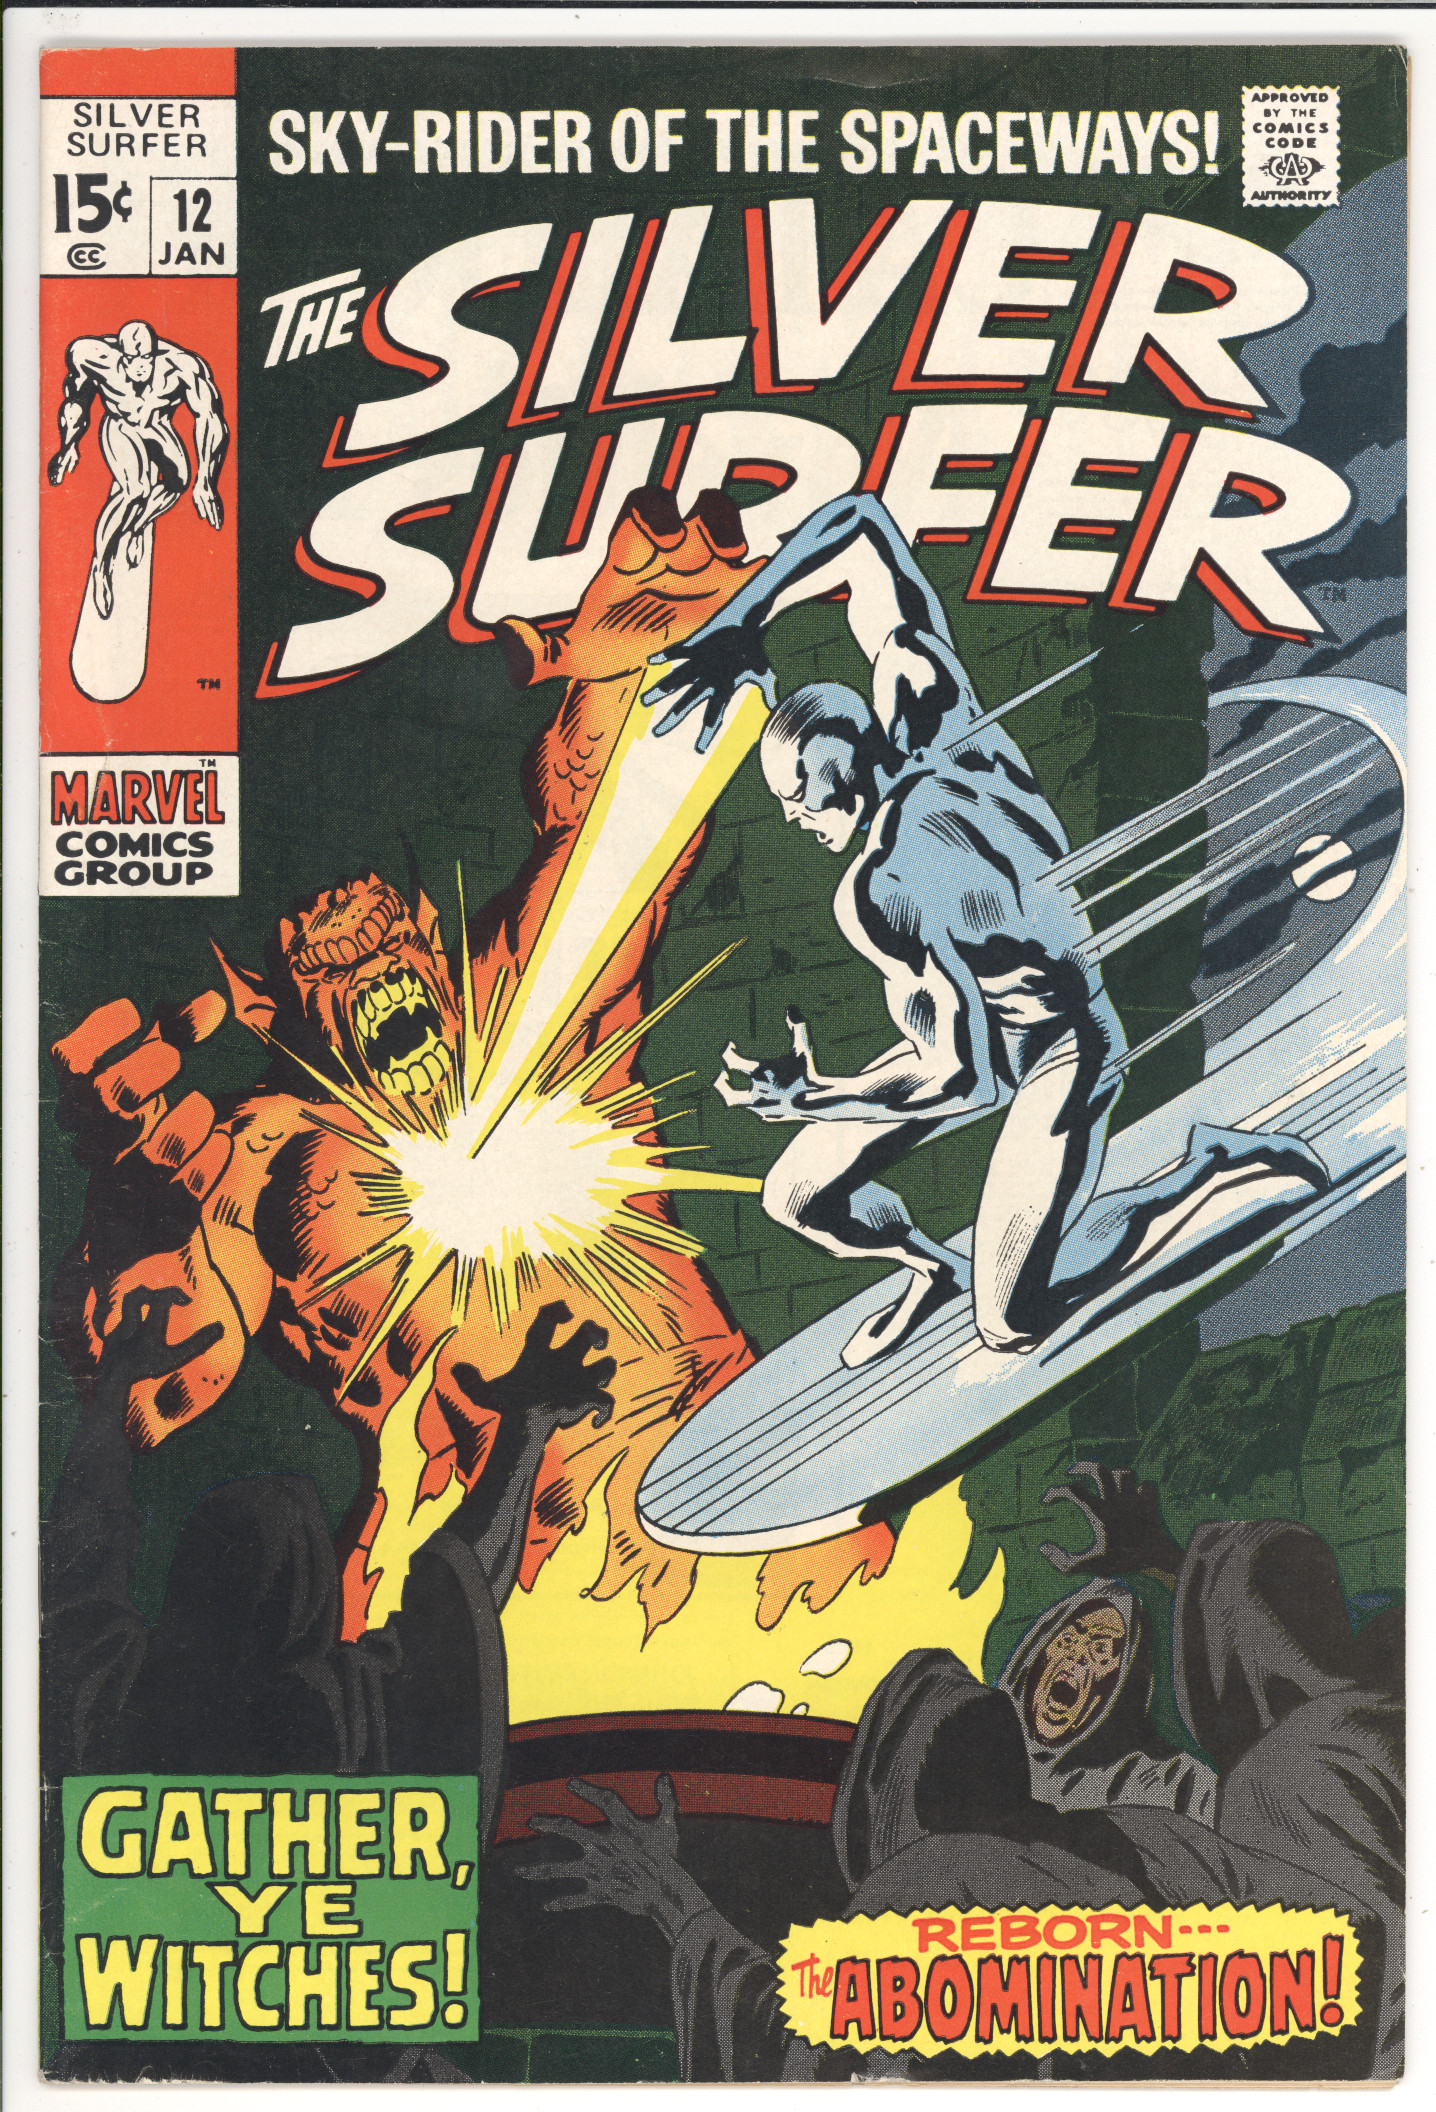 Silver Surfer #12 front